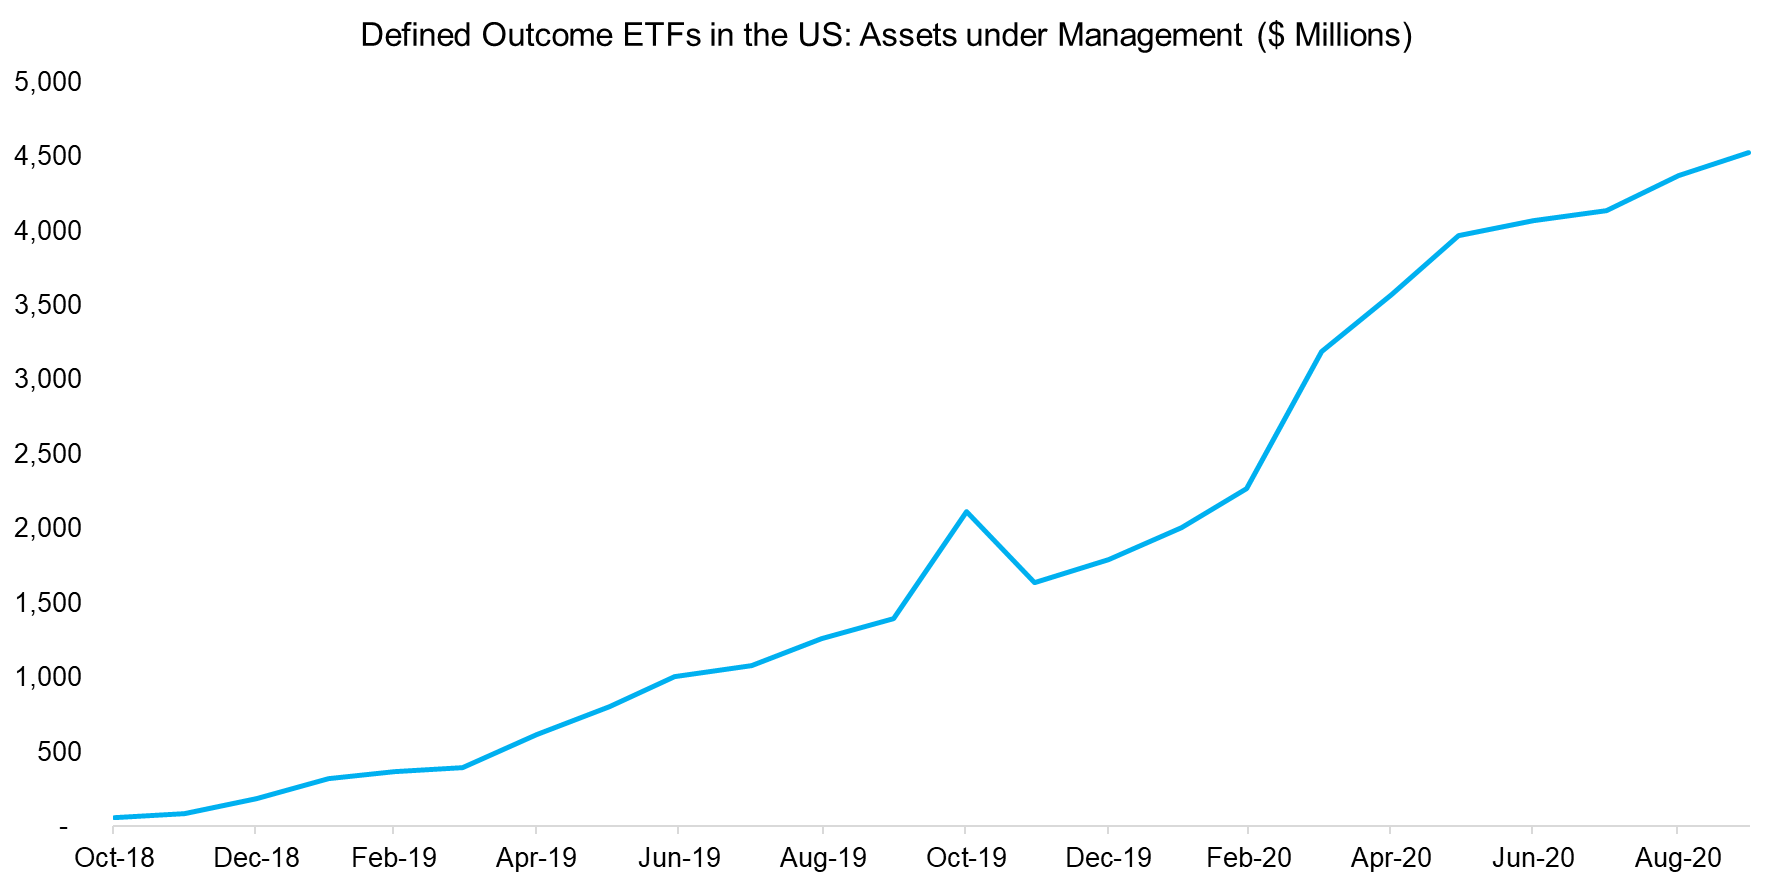 Defined Outcome ETFs in the US Assets under Management ($ Millions)